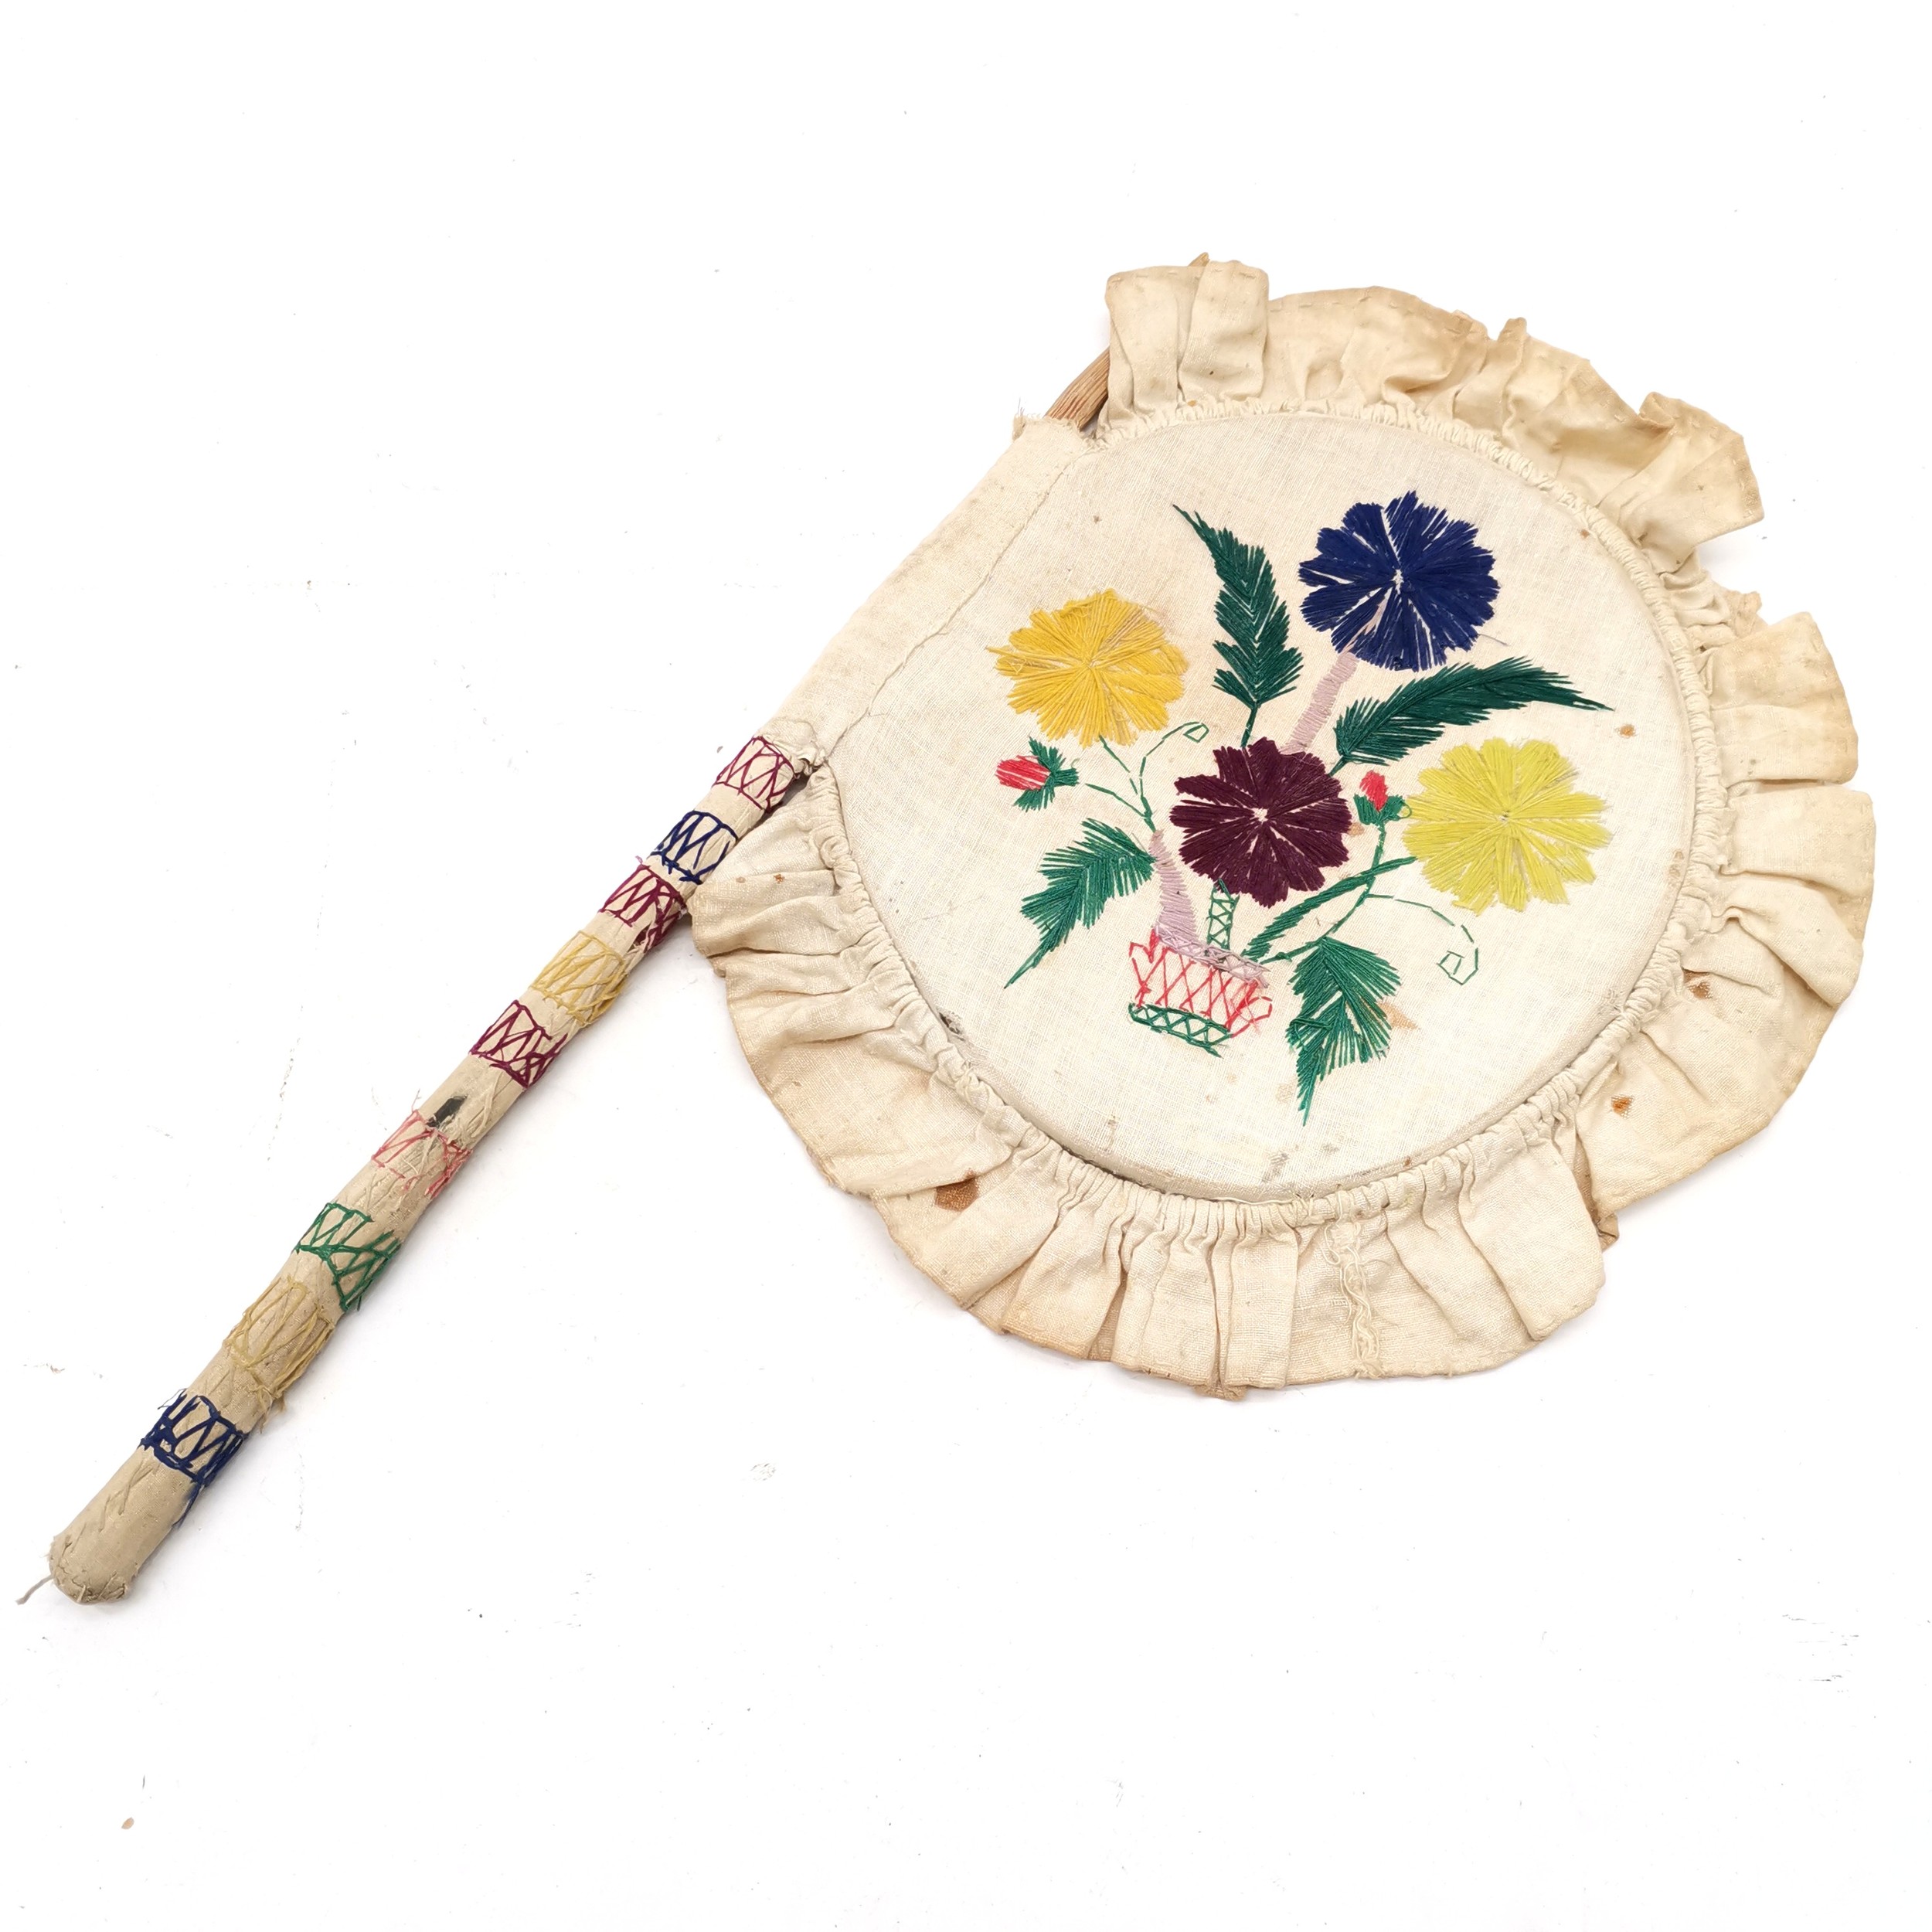 Hand embroidered Indian made fan on wooden shaft - 45cm long & has obvious wear & marks